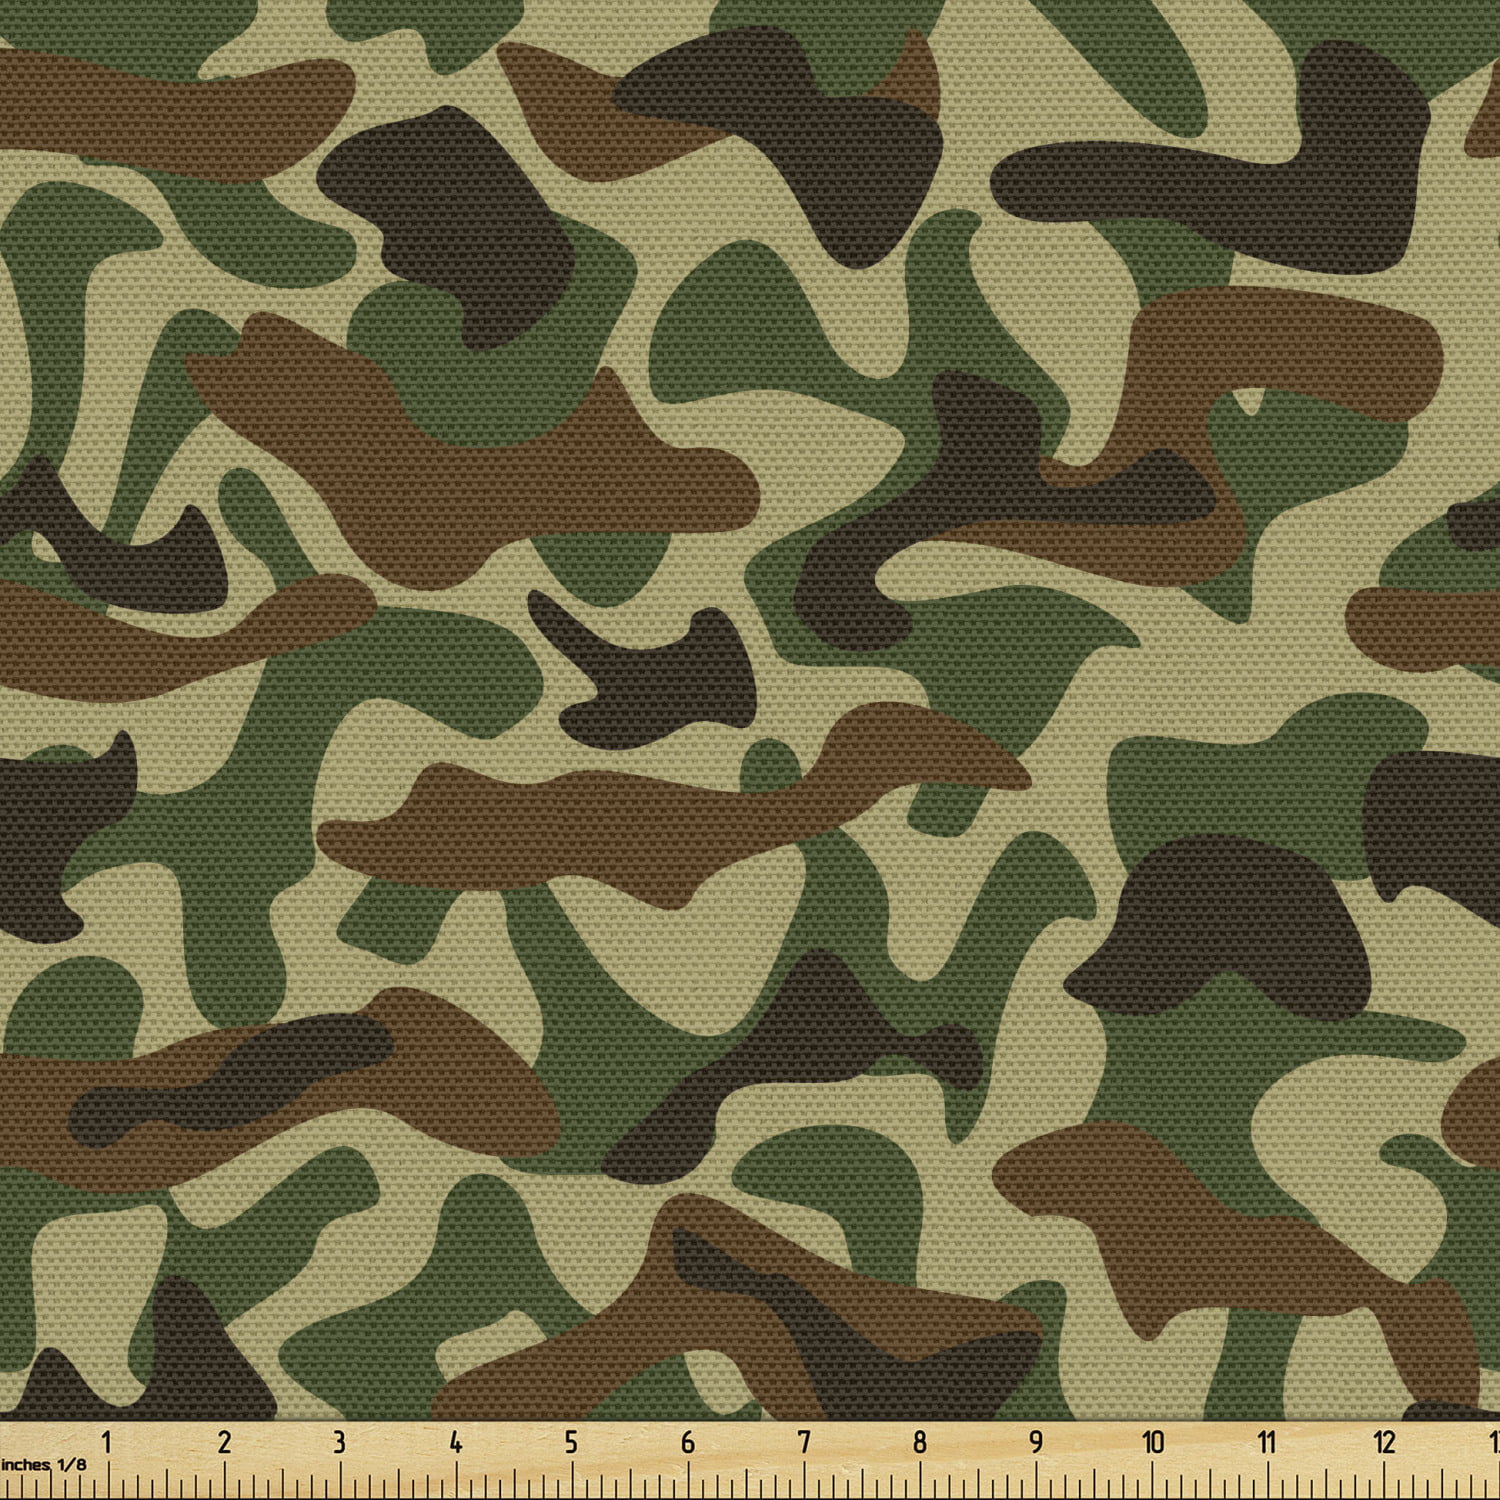 Camouflage Fabric by the Yard, Squad Uniform Design with Vivid Color ...